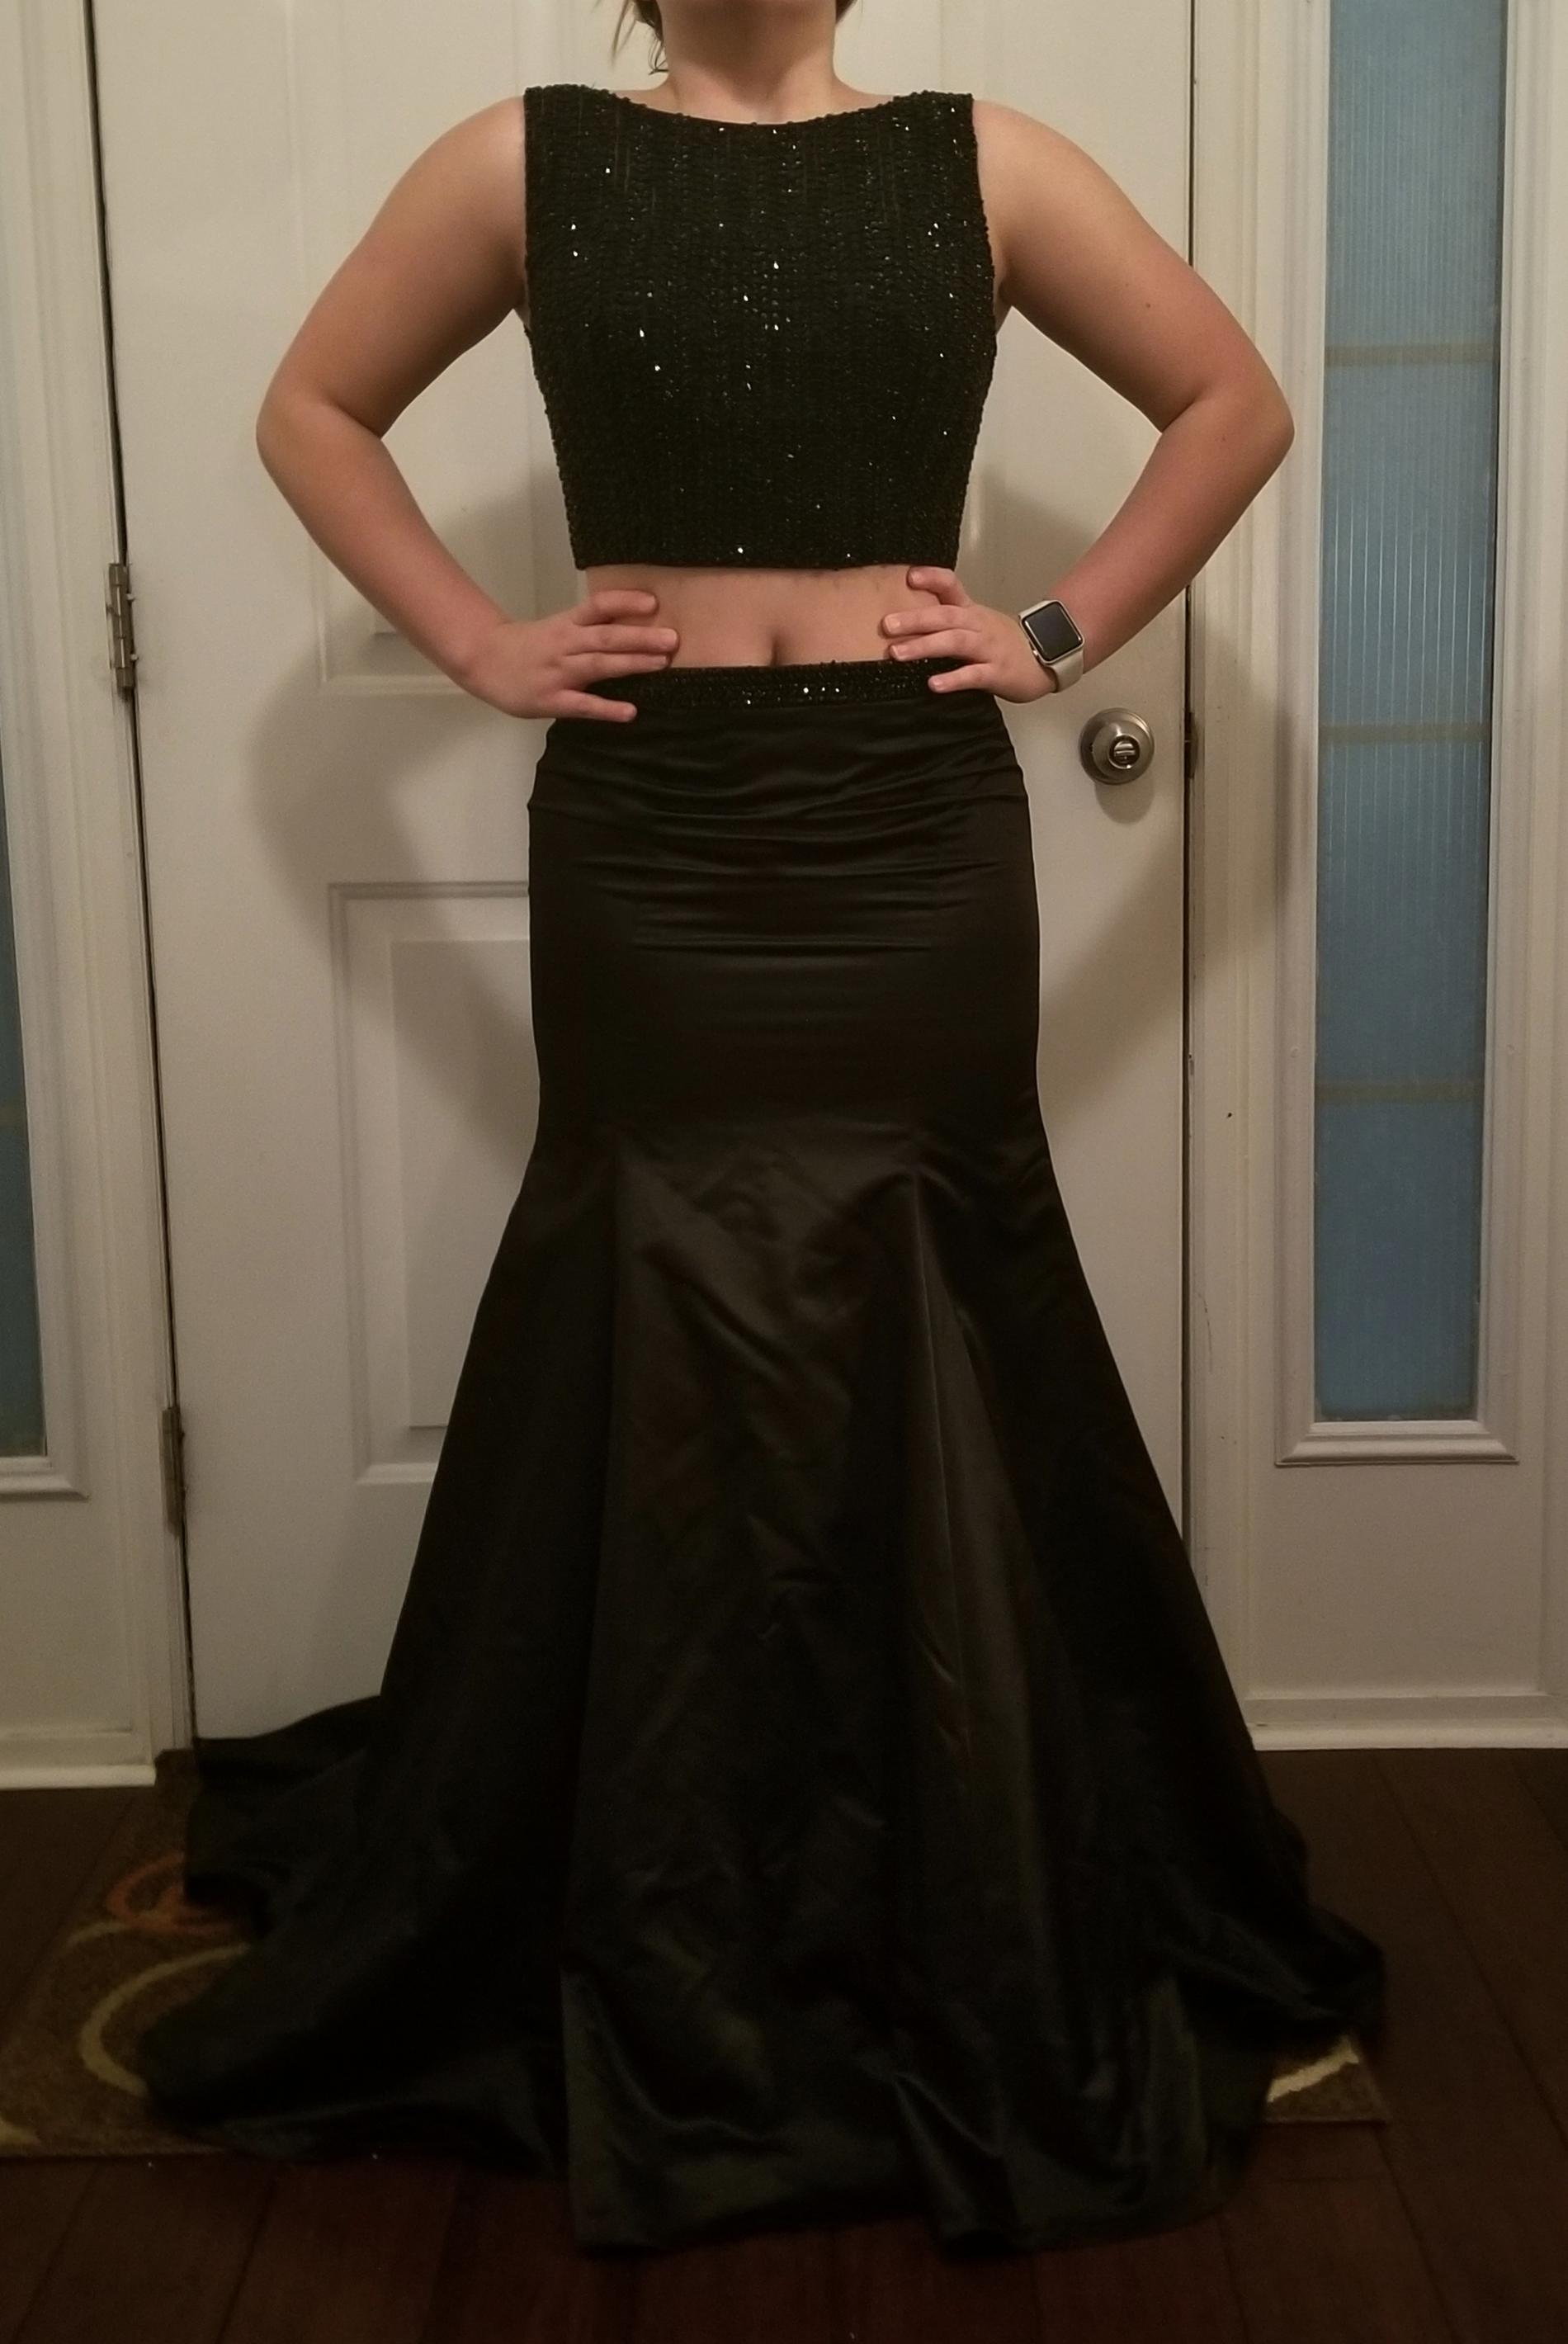 Sherri Hill Size 6 Prom Sequined Black Ball Gown on Queenly